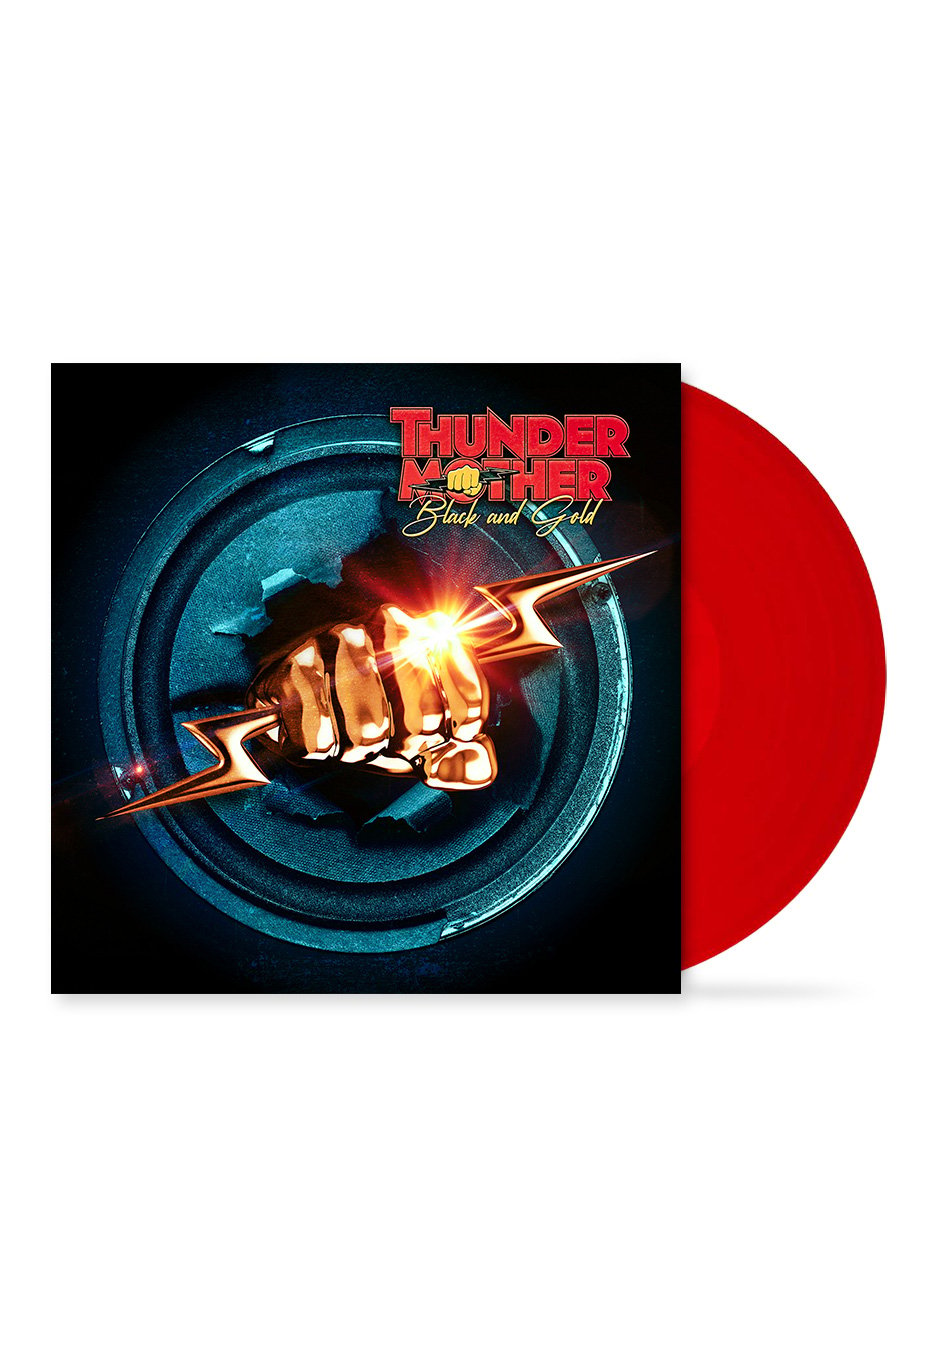 Thundermother - Black And Gold Ltd. Clear Red - Colored Vinyl